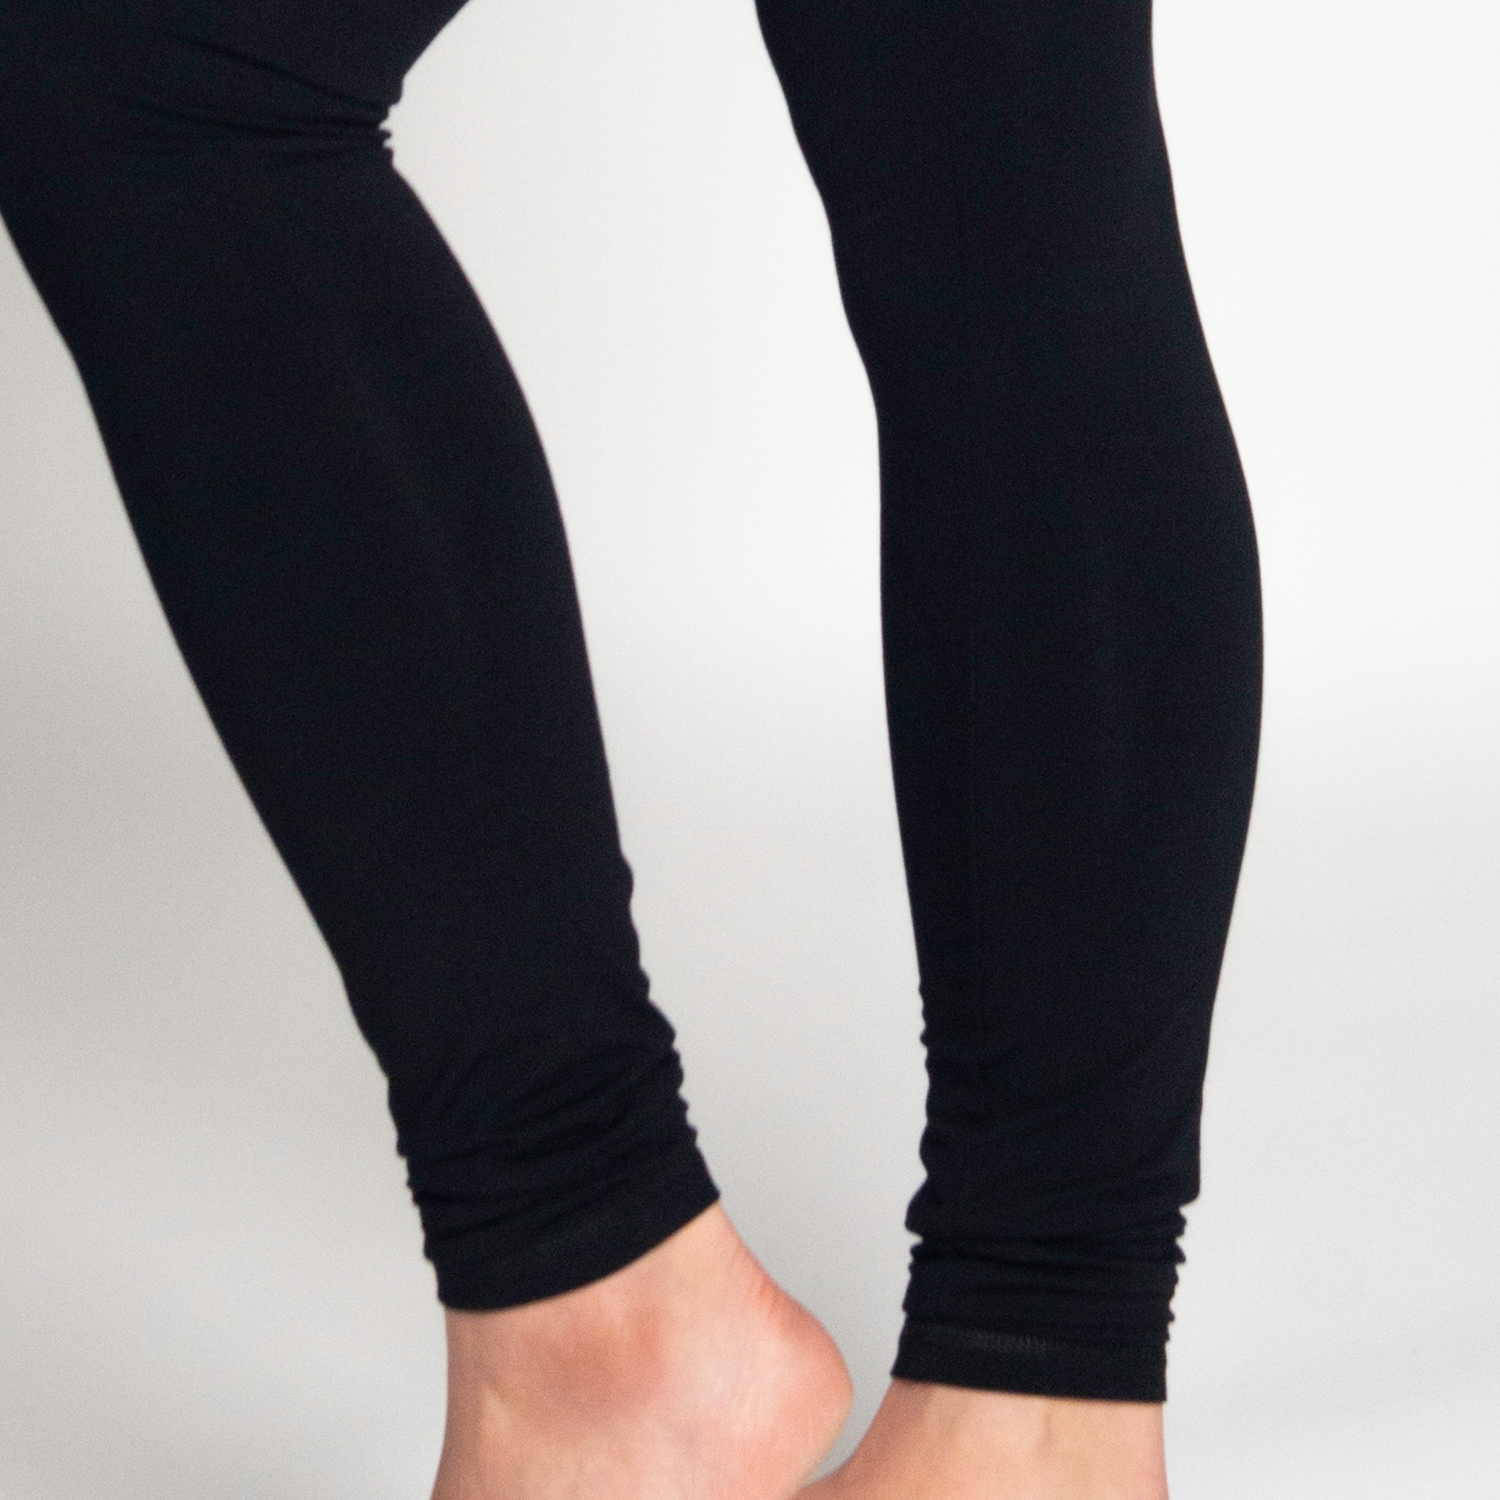 Daily Ritual Leggings Are Ideal for Everyday Wear and Have Pockets